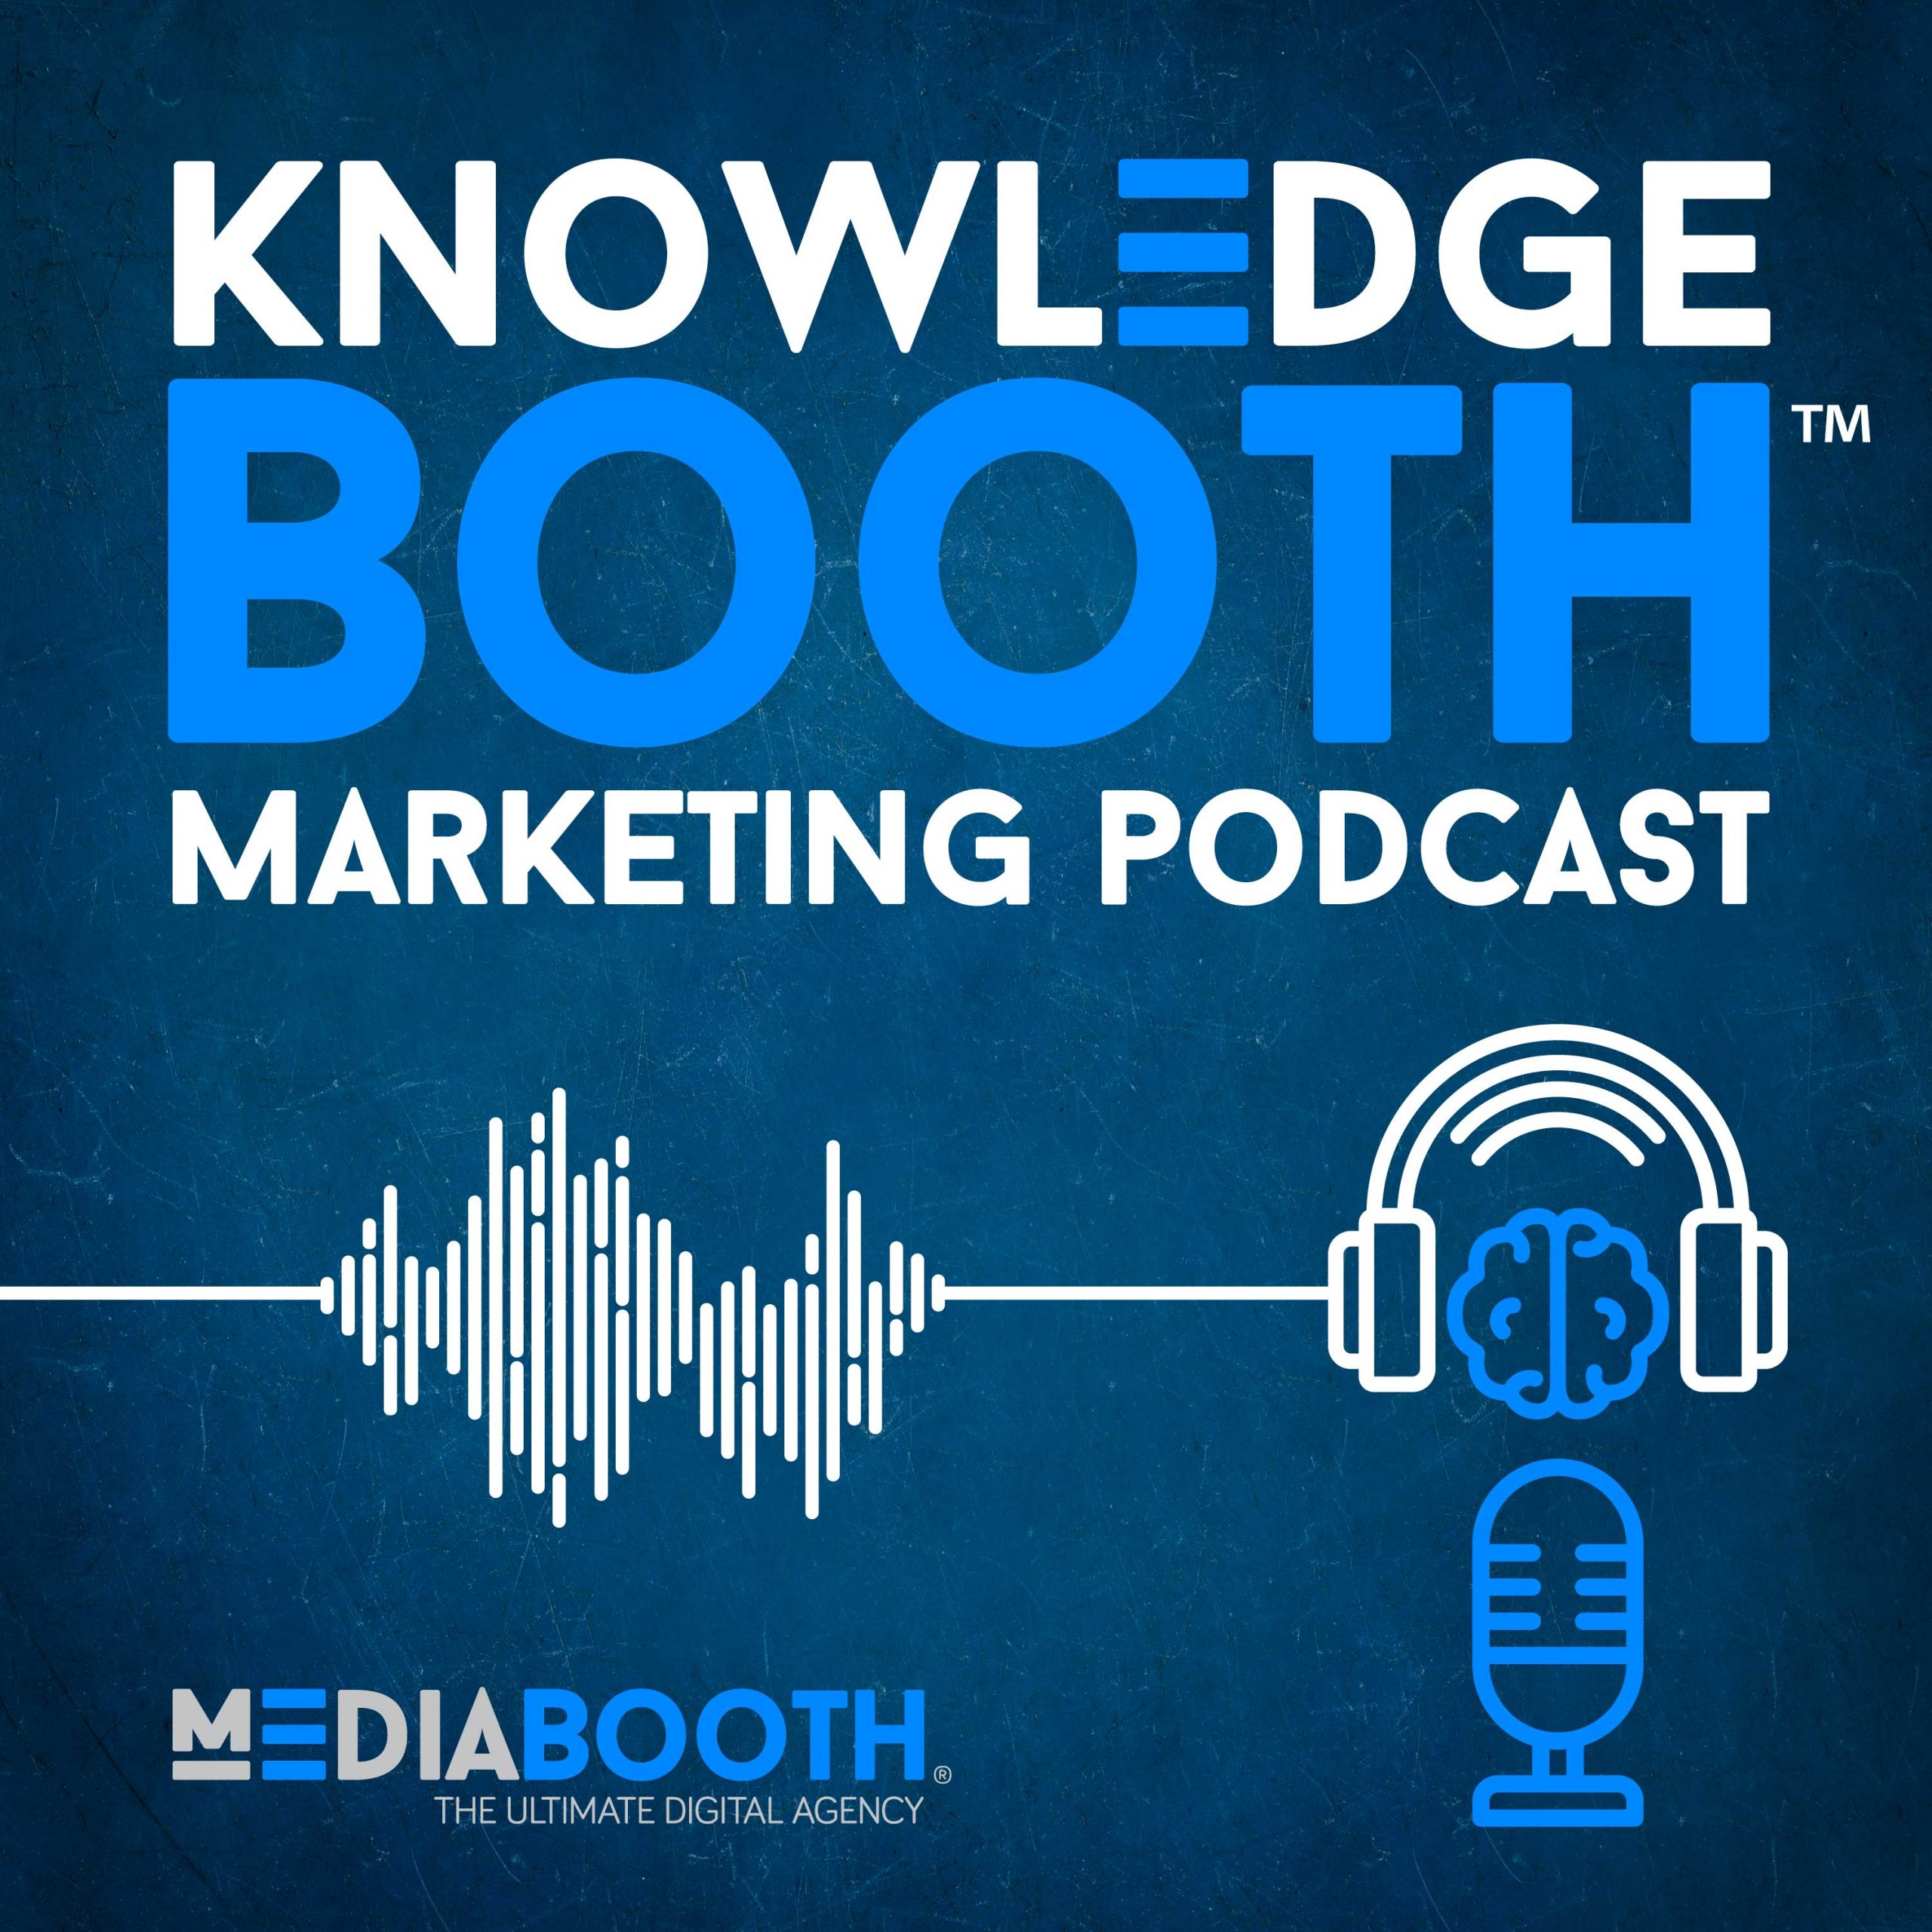 Artwork for podcast Knowledge Booth Marketing Podcast